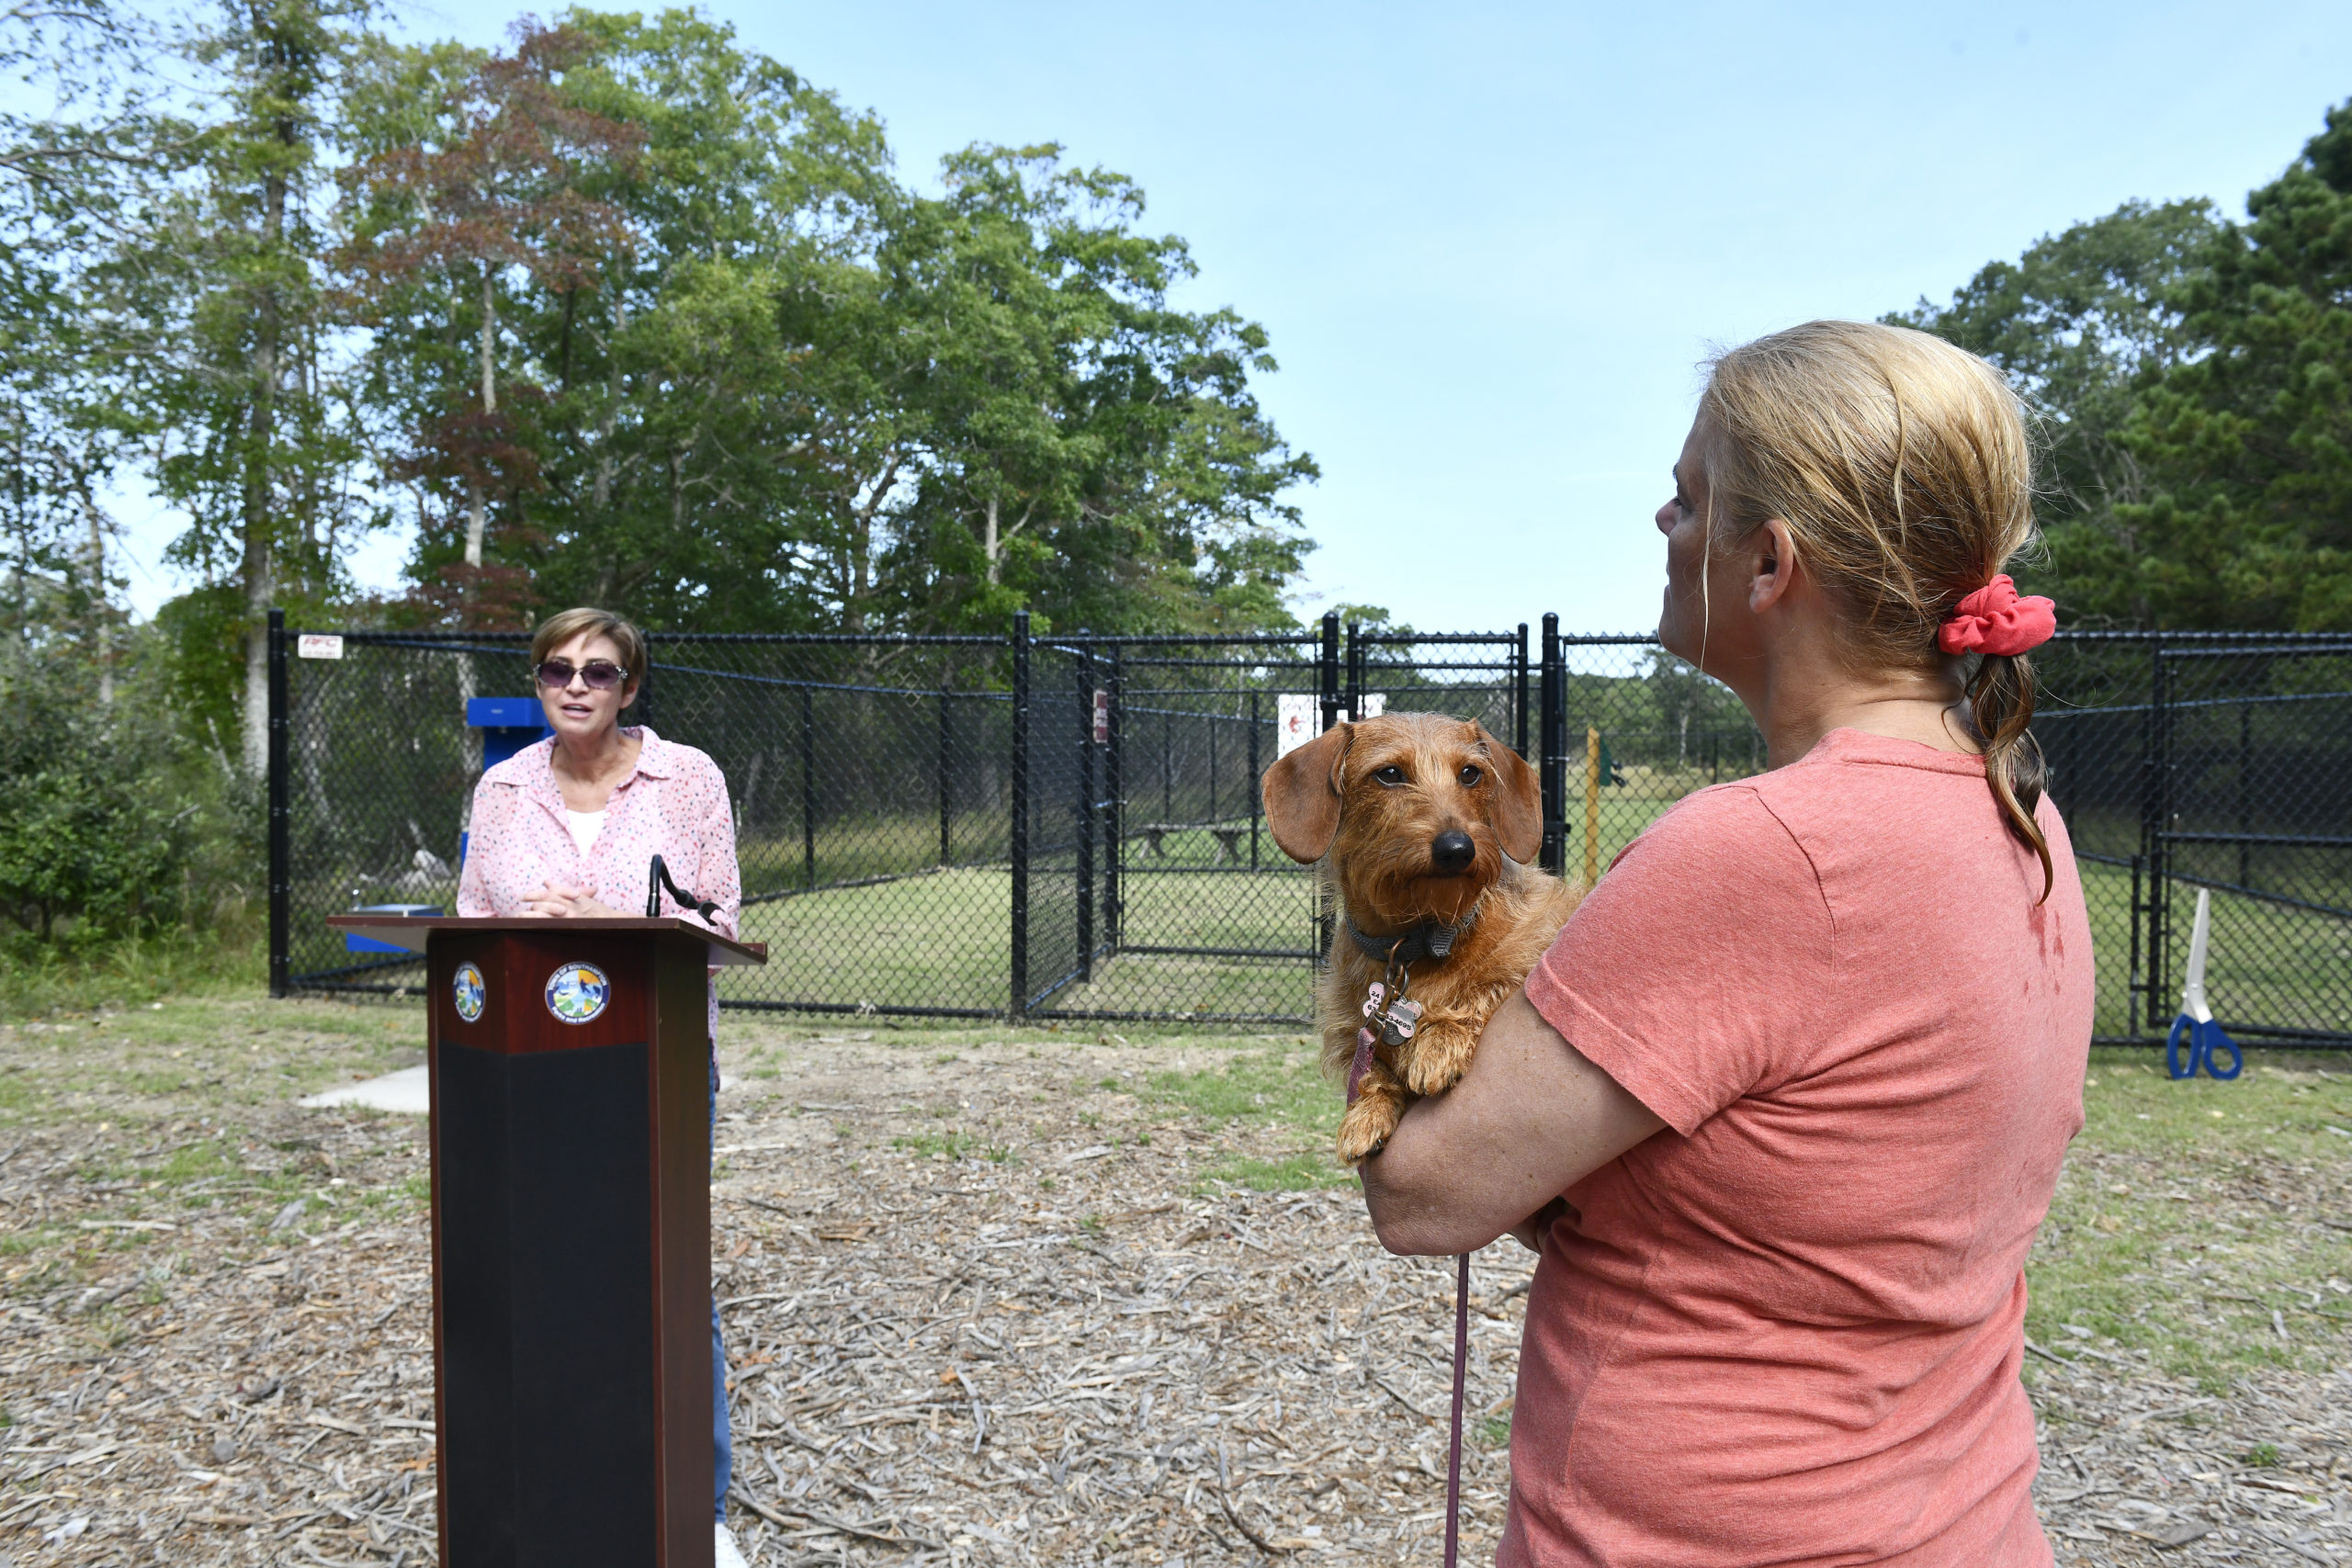 Southampton Town Councilwoman Julie Lofstad welcomes guests to the opening of he Off the Leash Dog Park in East Quogue on Monday morning. The park is located at Pine Neck Marina, 22 Josiah Foster Path in East Quogue.   DANA SHAW